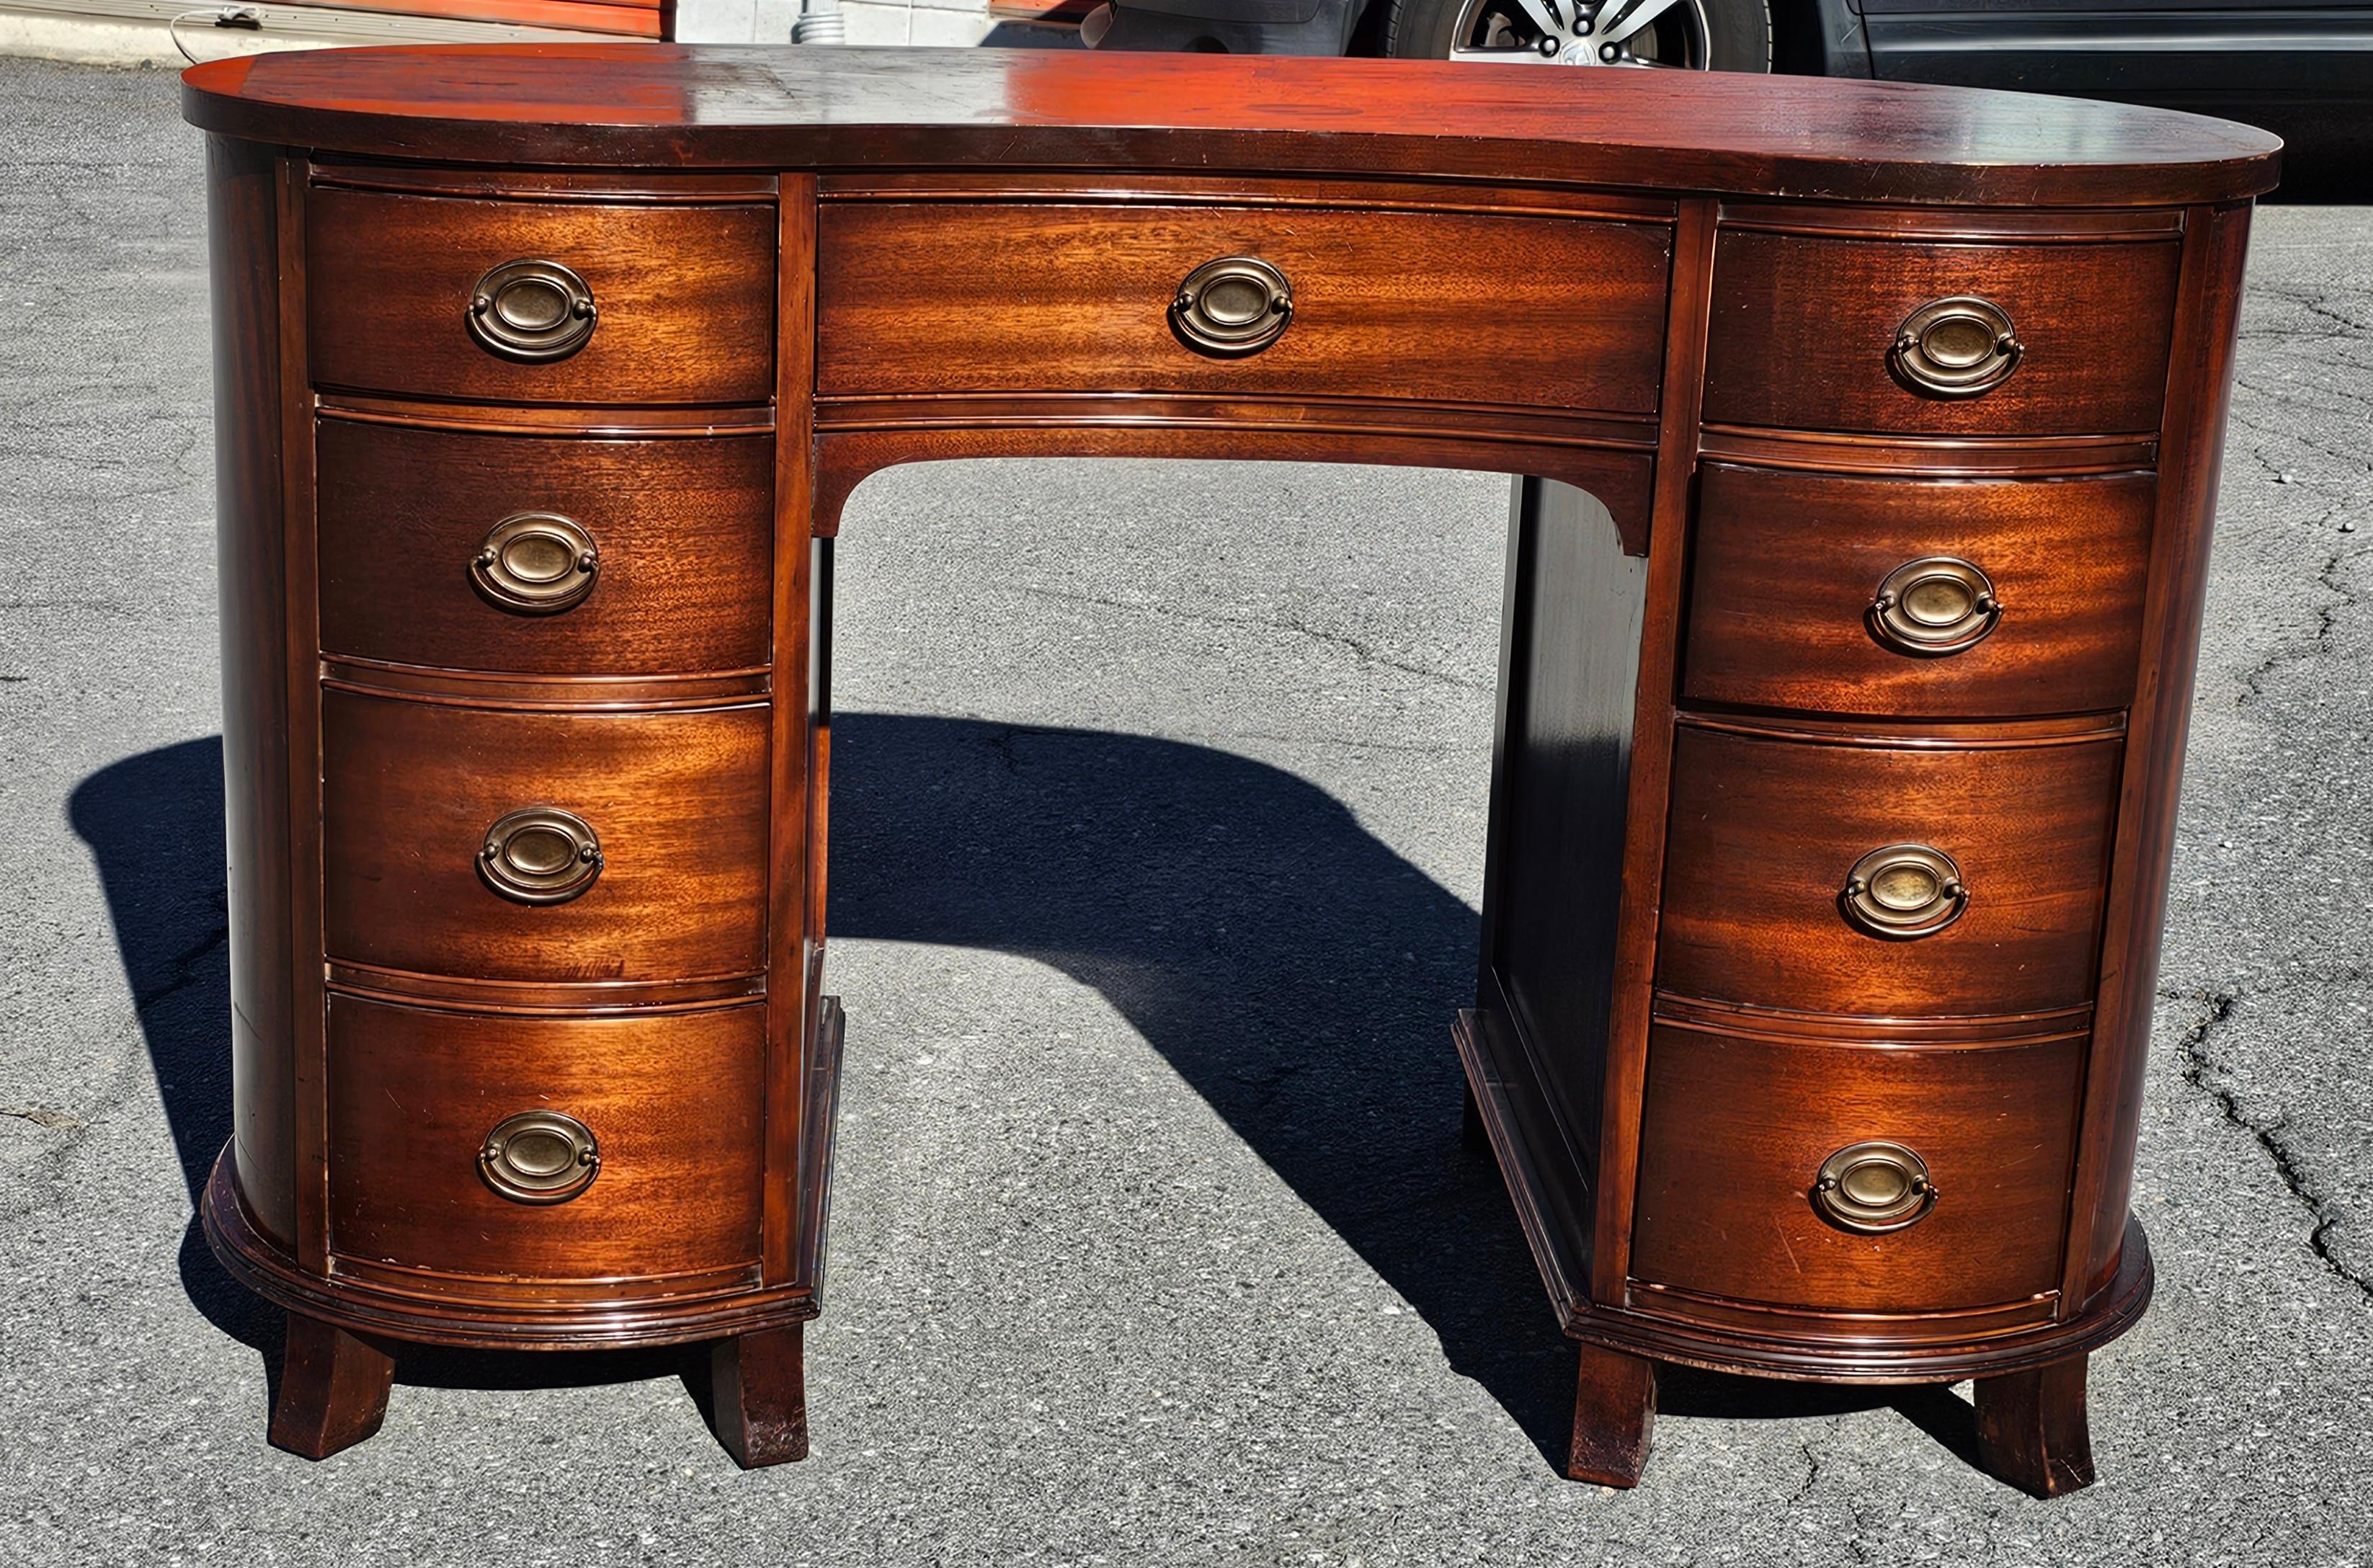 Mid 20th Century Solid Mahogany Federal Kidney Desk in great vintage condition. Top newly and professionally refinished and flawlessly working drawers
Measures 46